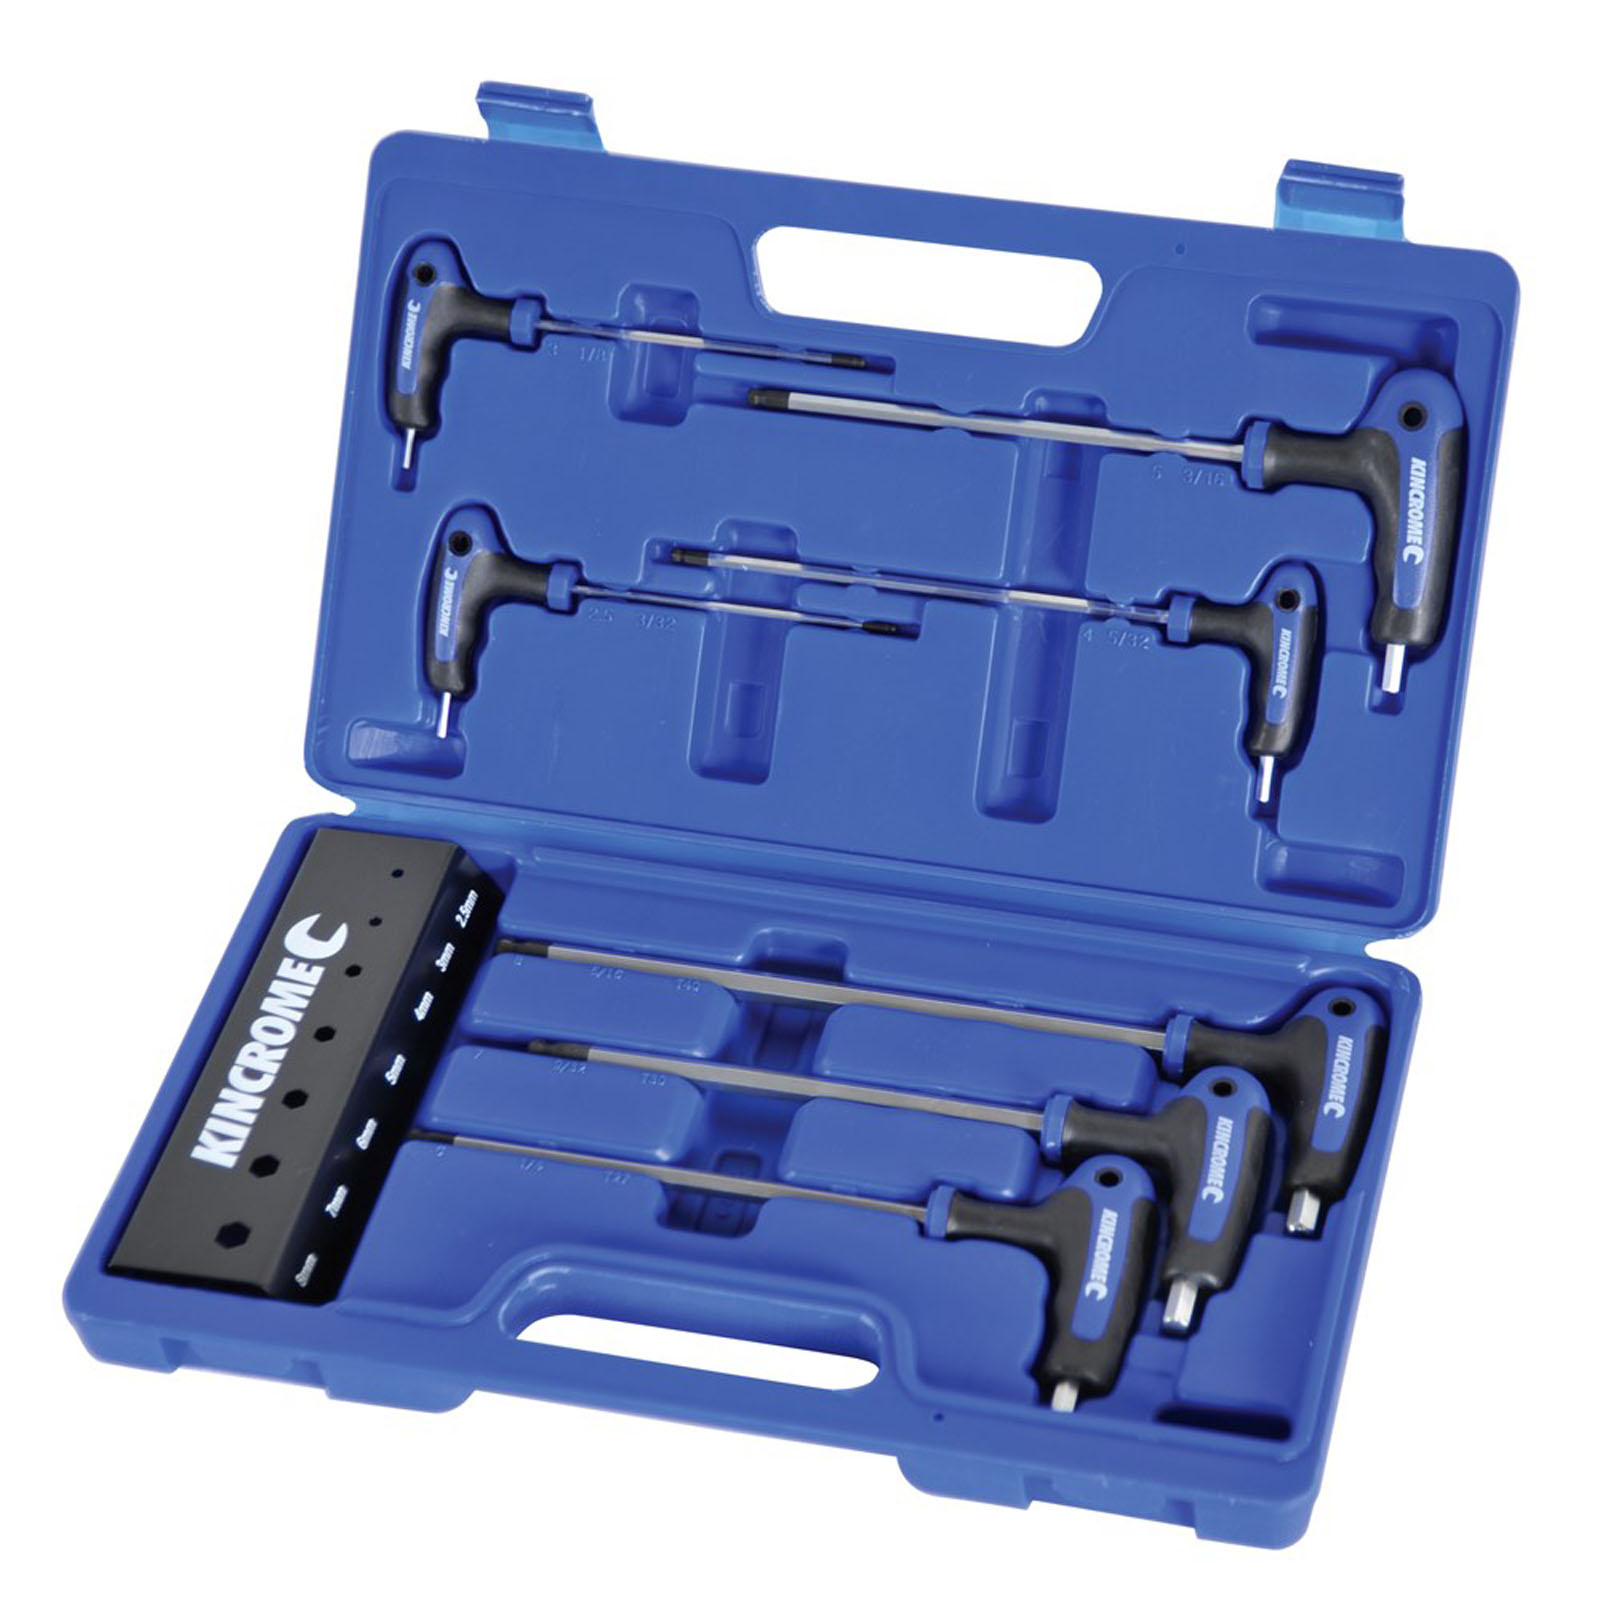 T-handle Hex Key Wrench Set 7 Piece Metric